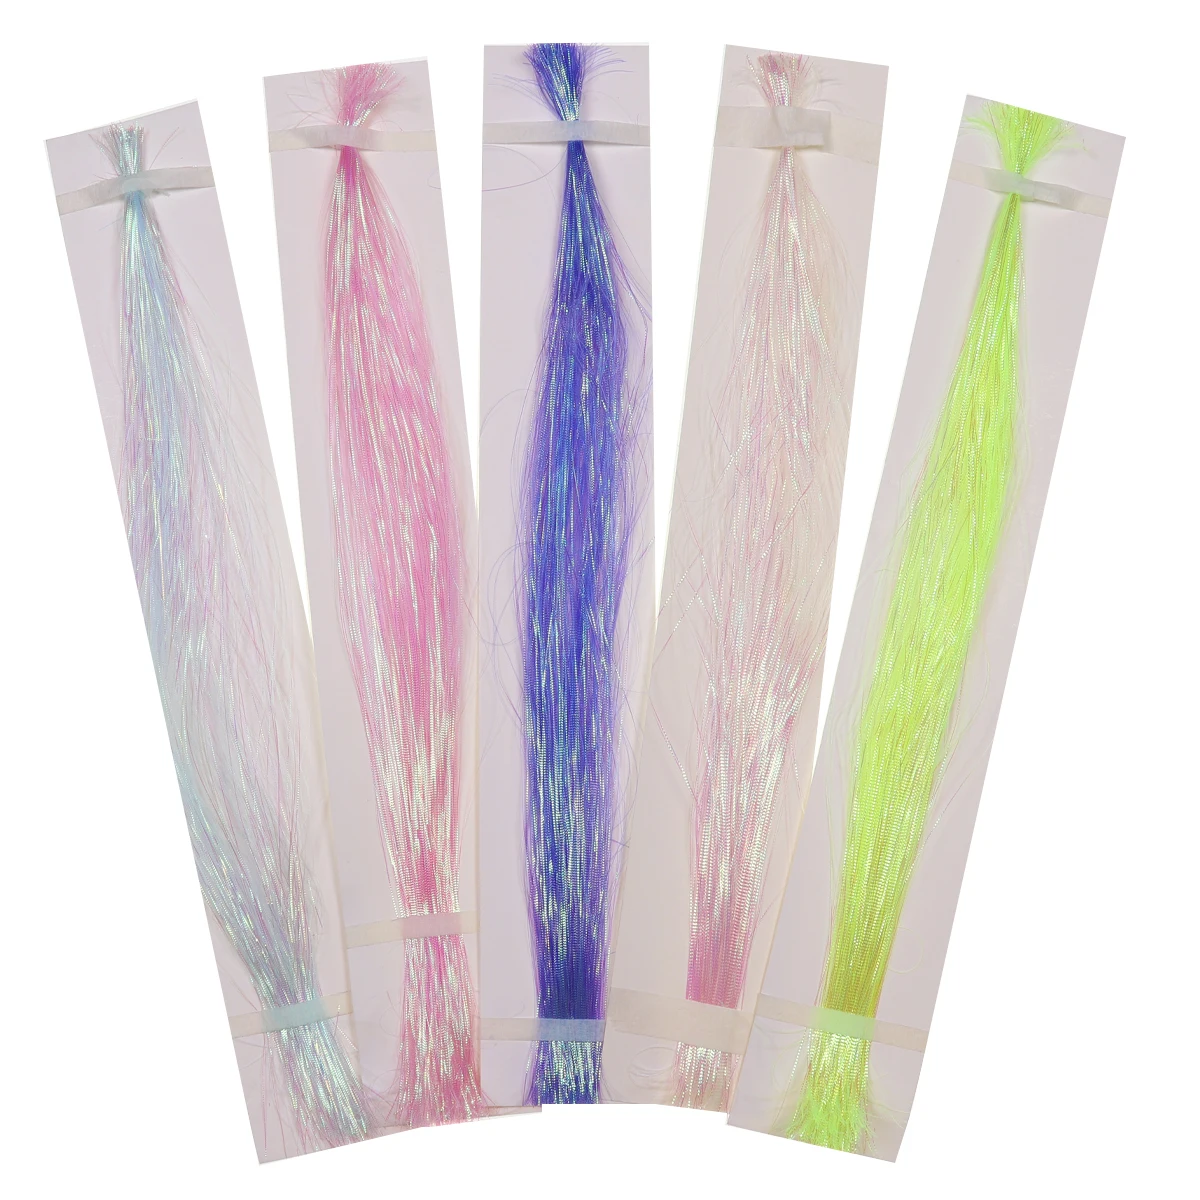 

Gliss Glow Flash Corrugated Flash Strands Saltwater Flashbou Bucktail Spinnerbait Fishing Lure Bass Fly Tying Materials, Chartreuse, blue, lake blue,pearl white, pink